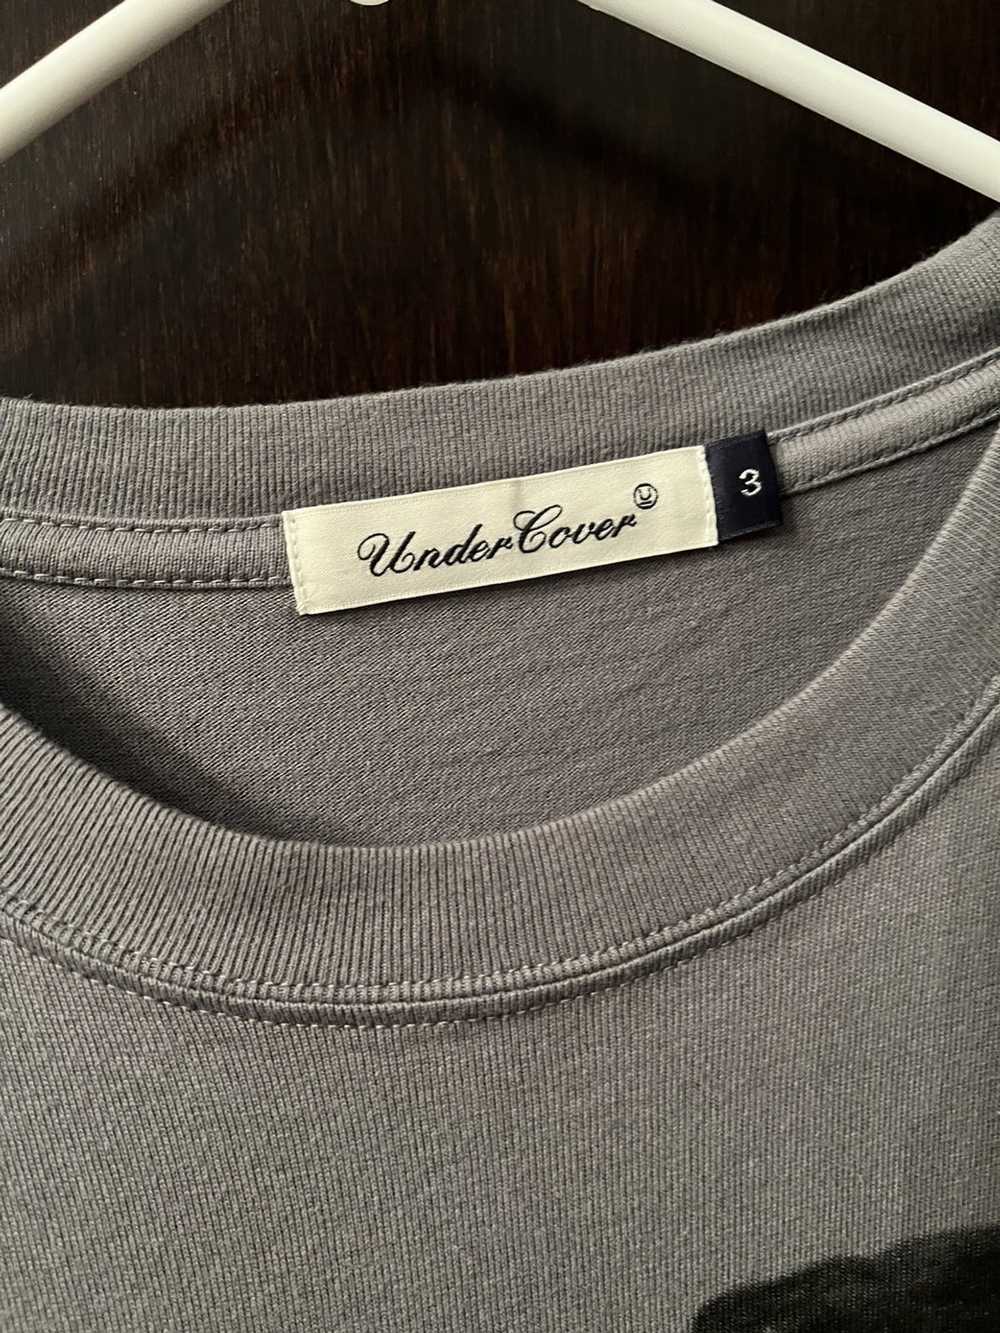 Undercover Undercover Tshirt - image 3